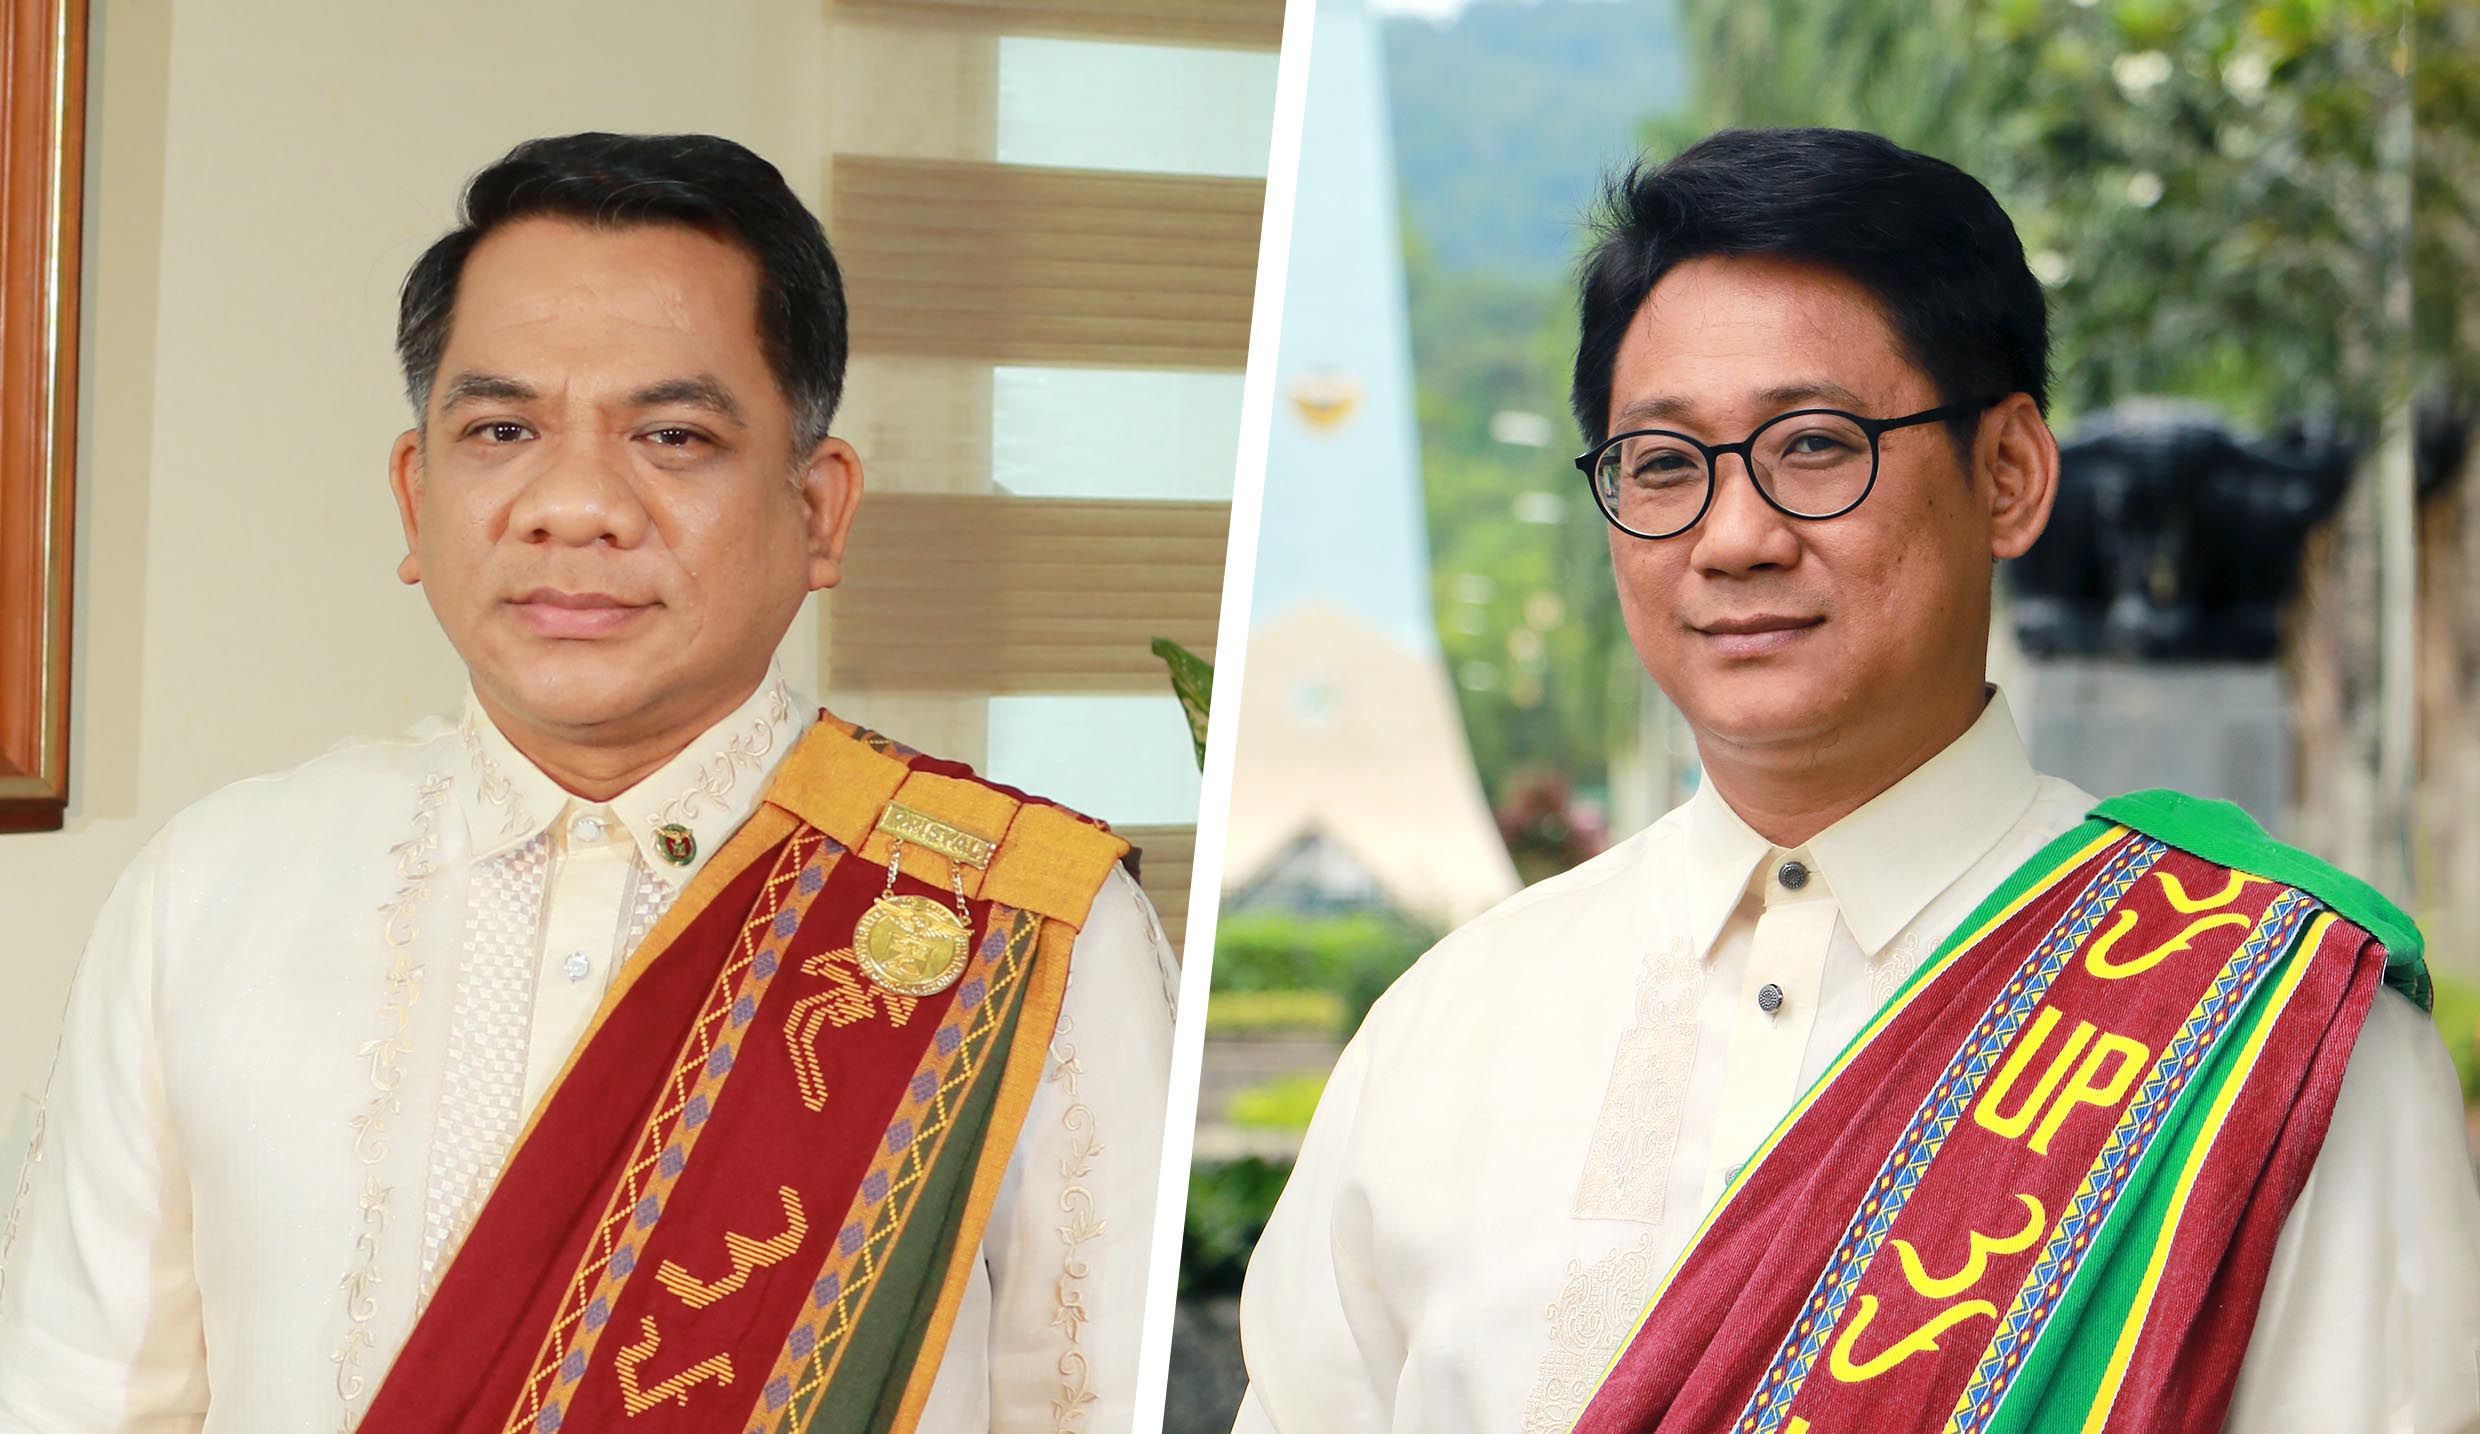 CHED welcomes Chancellor Camacho, Dean Cuevas to econ tech’l panel